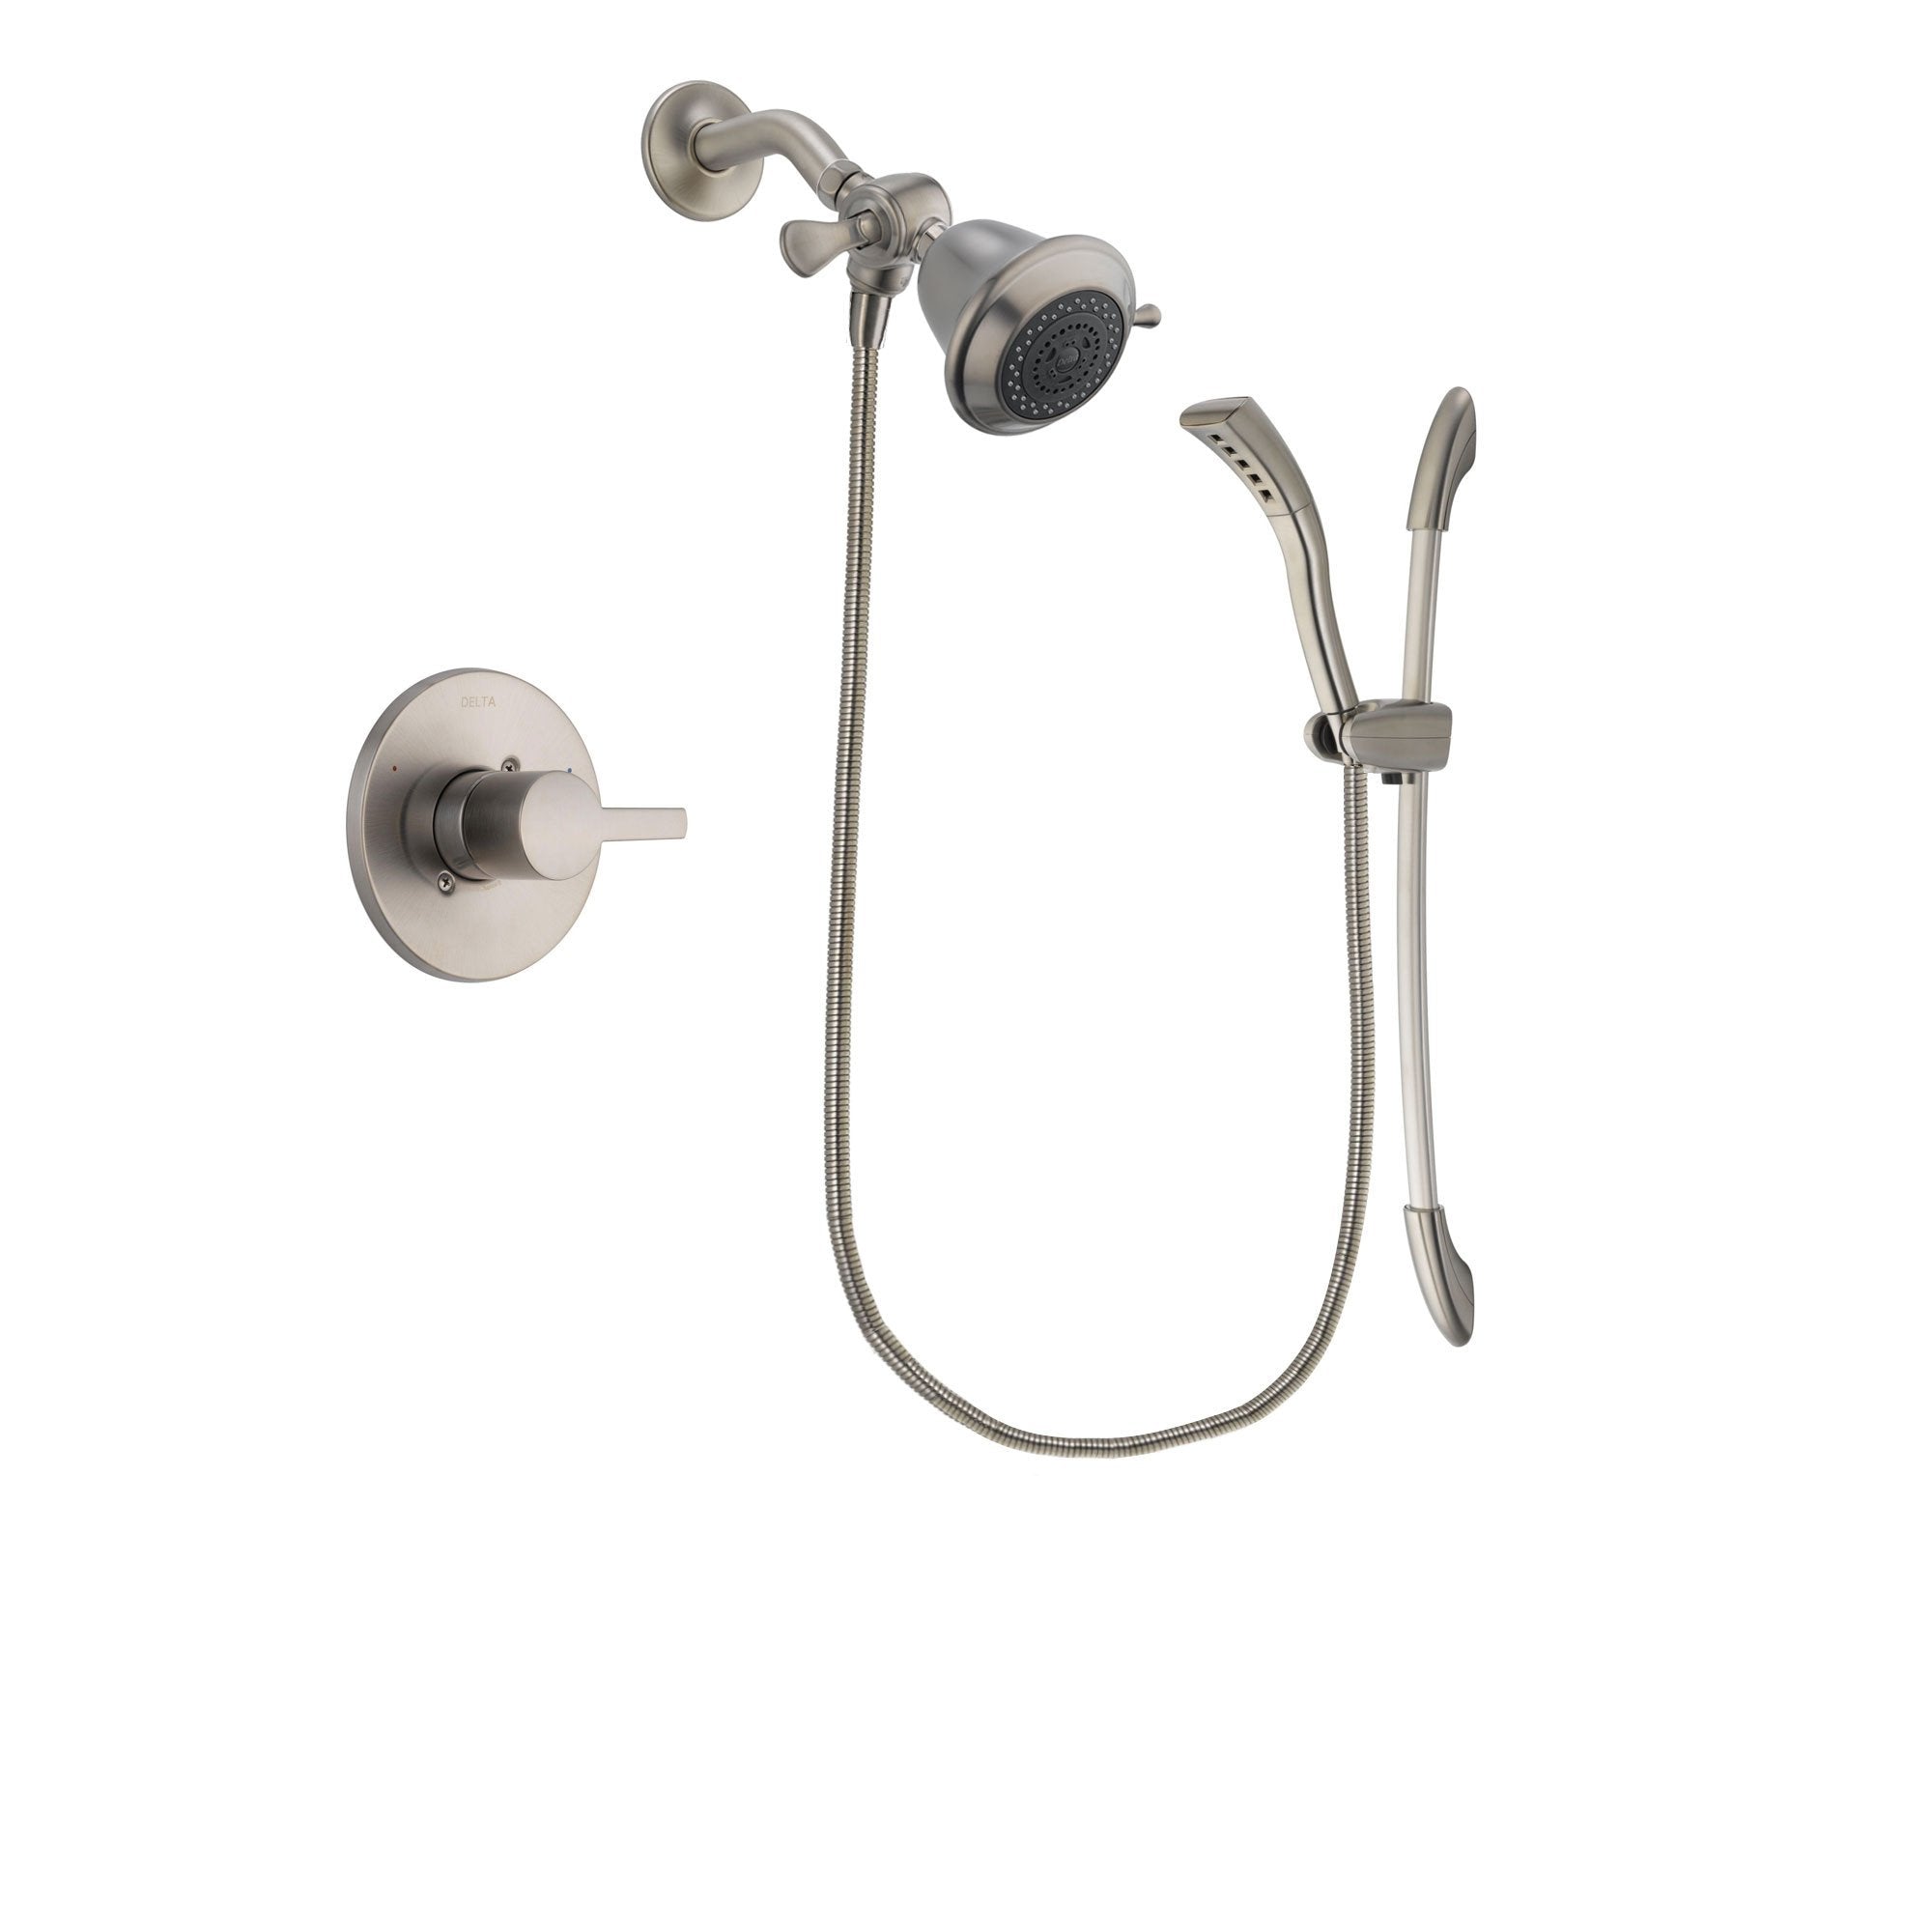 Delta Compel Stainless Steel Finish Shower Faucet System Package with Shower Head and Handshower with Slide Bar Includes Rough-in Valve DSP1392V